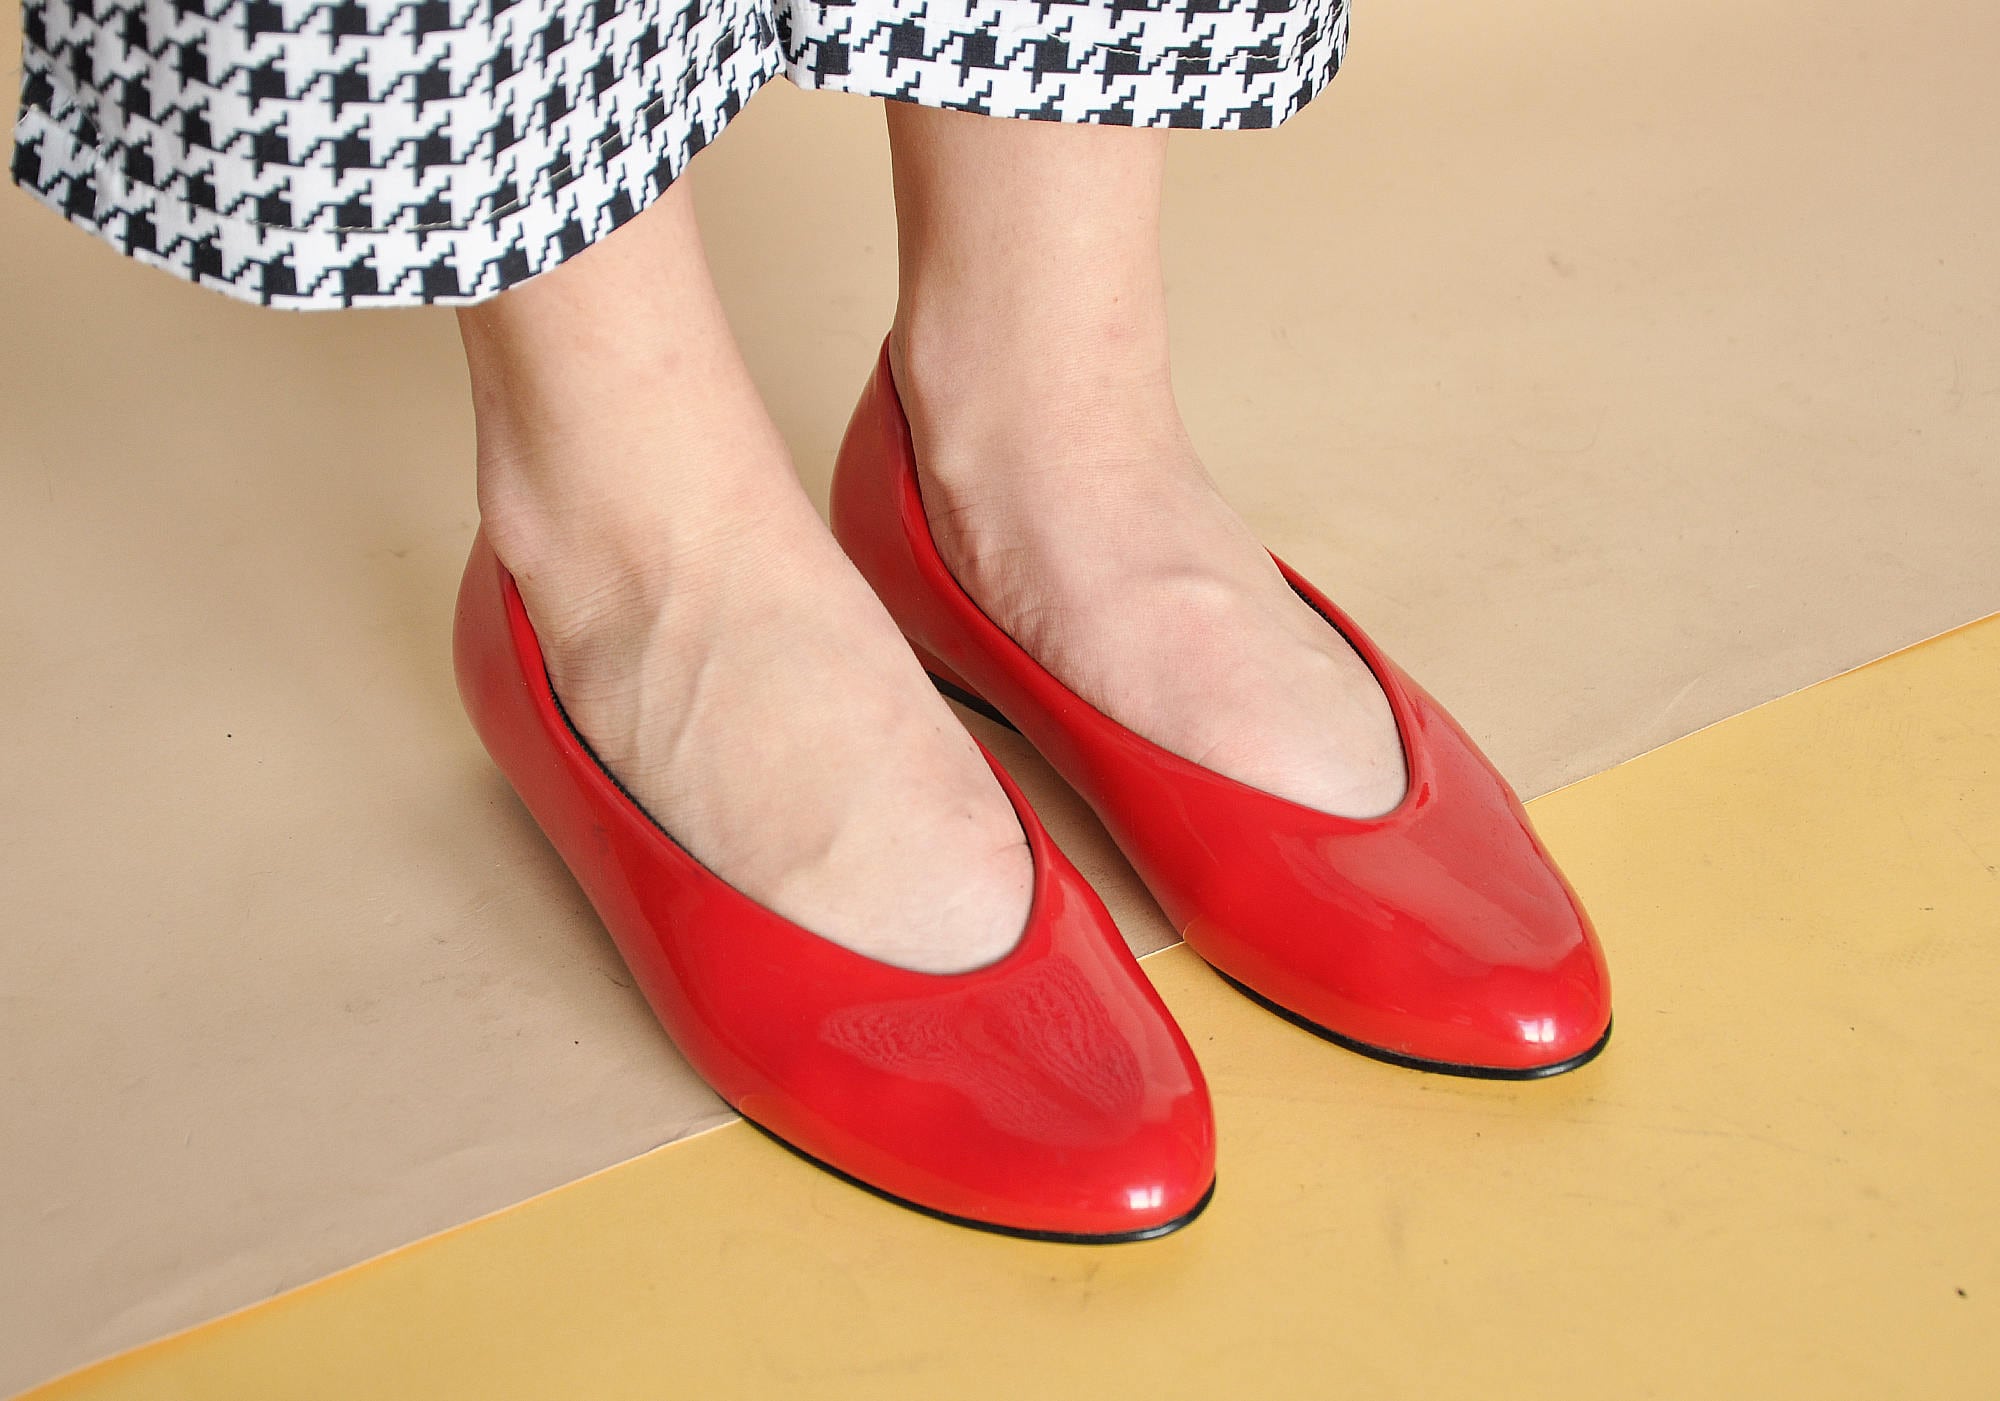 Europa I forhold Il 90s MOD Flats FLAT Shoes RED Shoes Red Flats Minimal Flats - Etsy Hong Kong